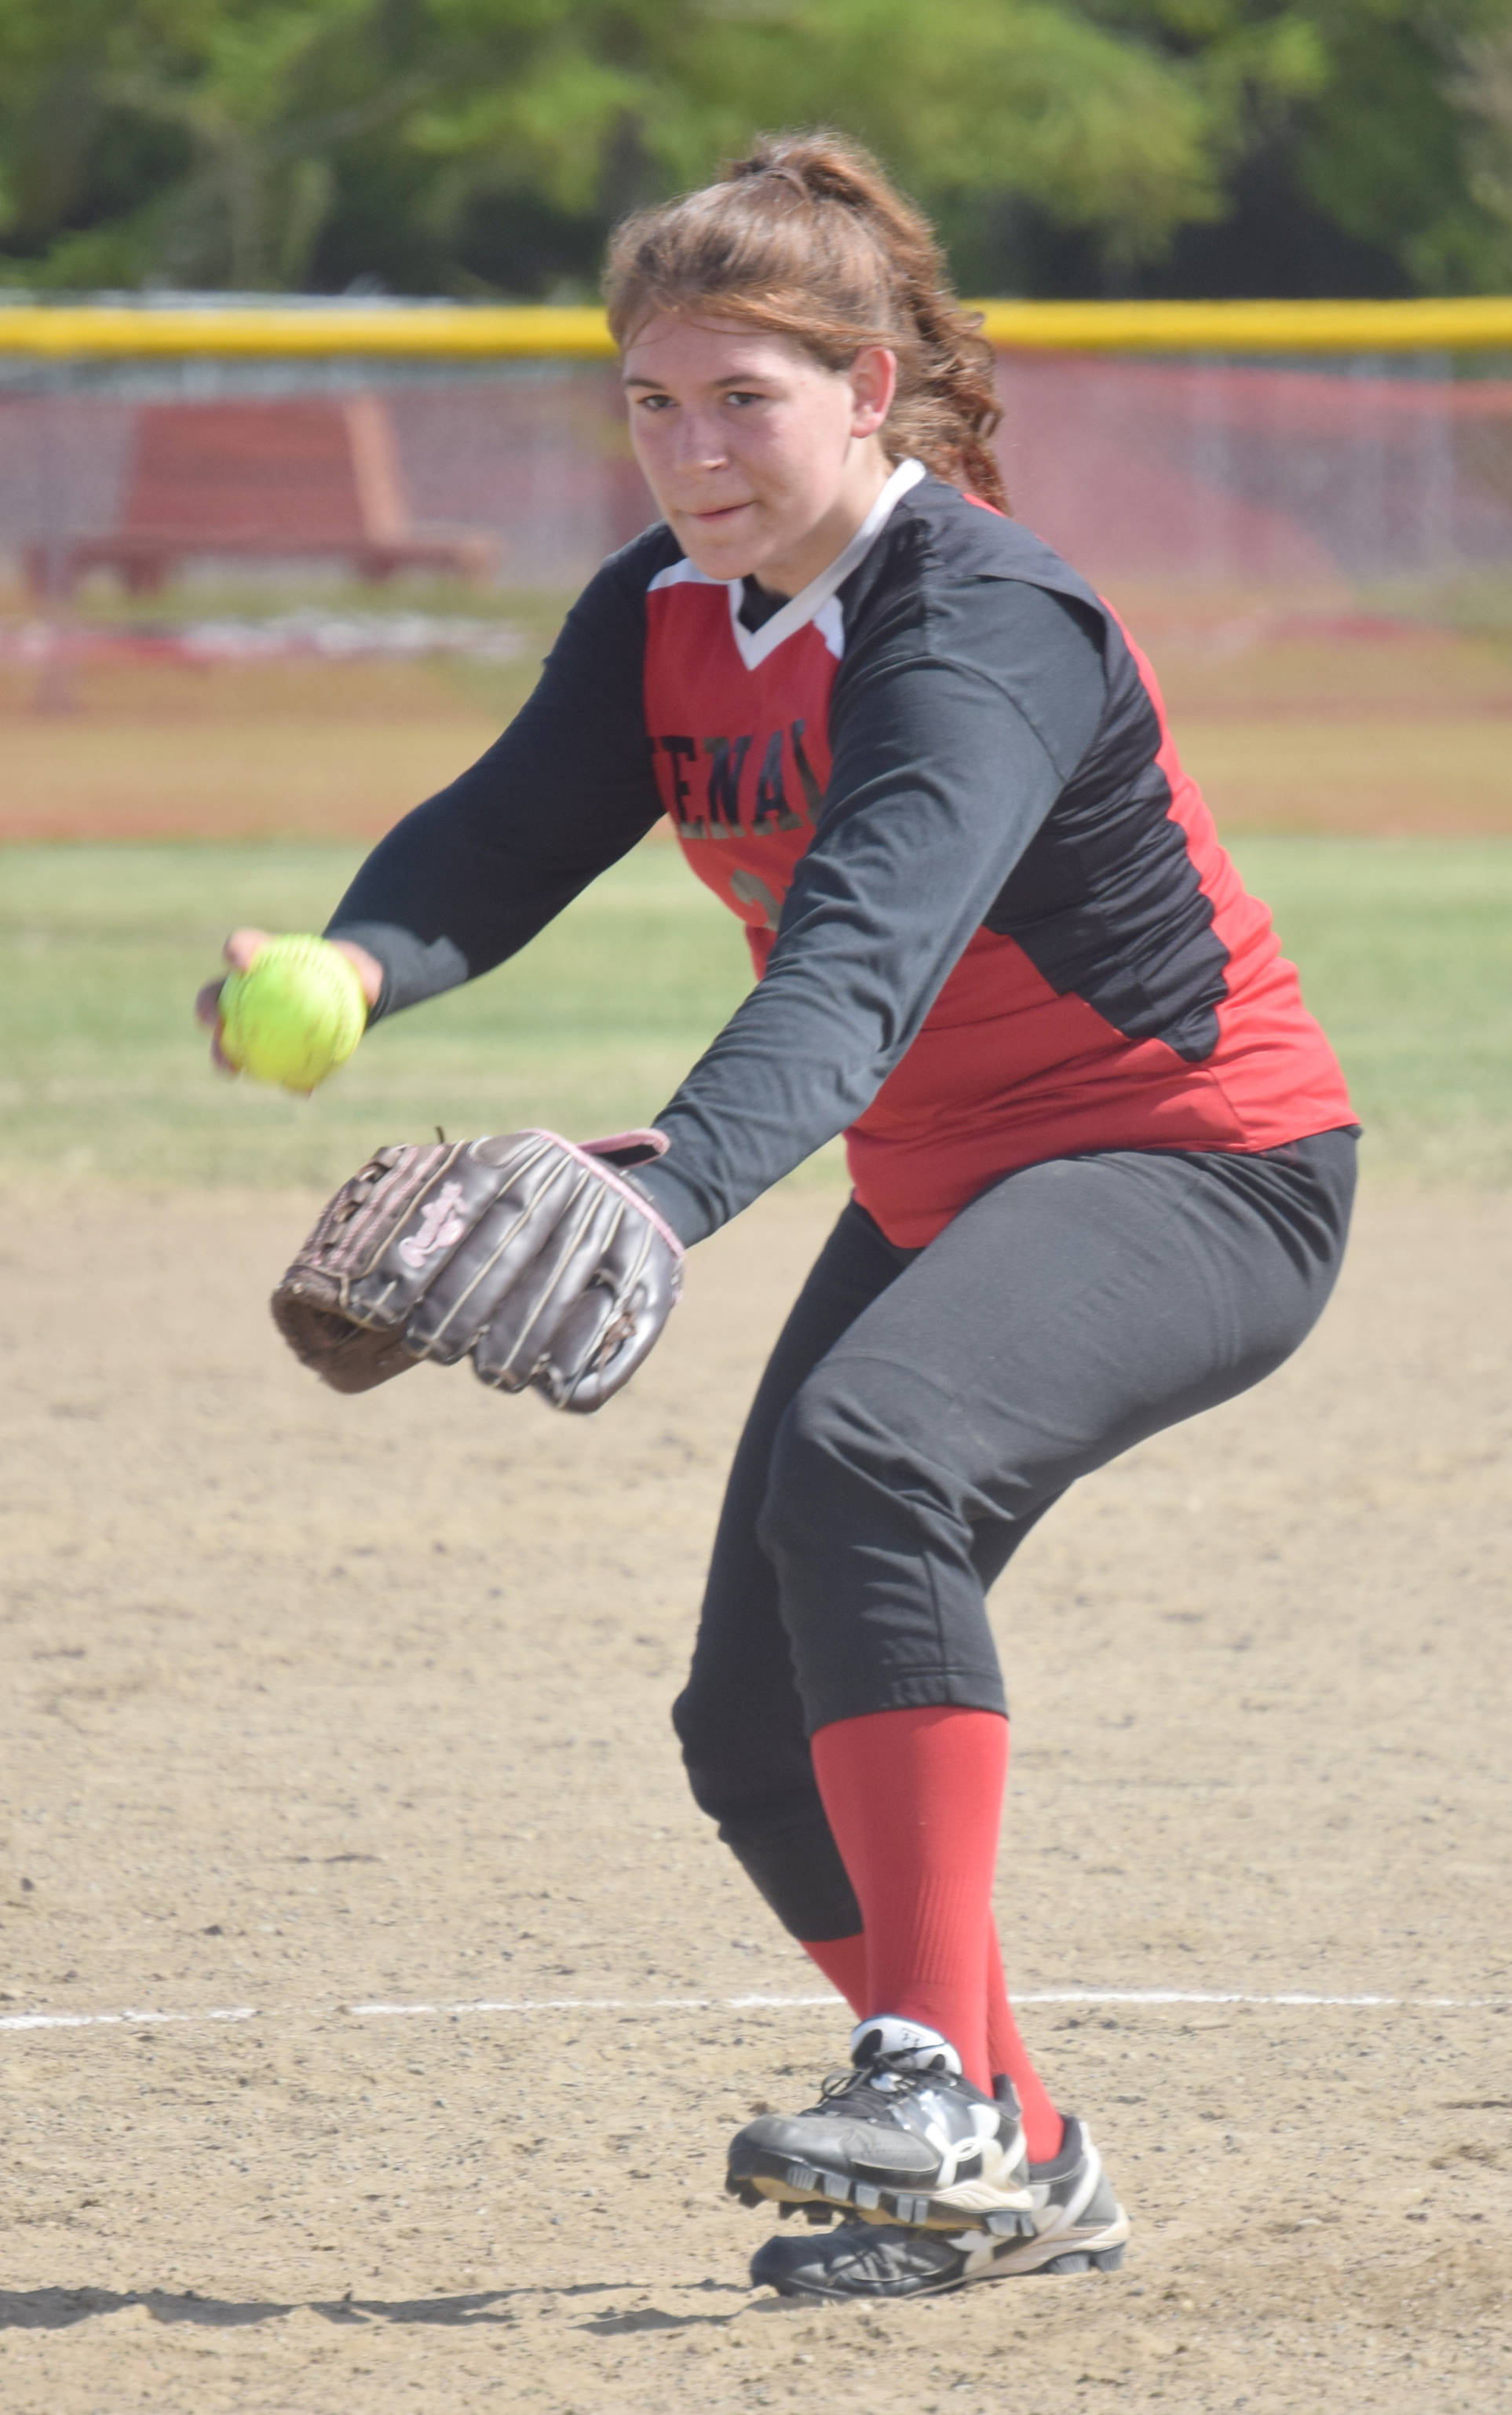 Kenai Central pitcher Kaylee Lauritsen delivers to Houston on Friday, May 24, 2019, in the Northern Lights Conference softball tournament at Steve Shearer Memorial Ball Park in Kenai, Alaska. (Photo by Jeff Helminiak/Peninsula Clarion)